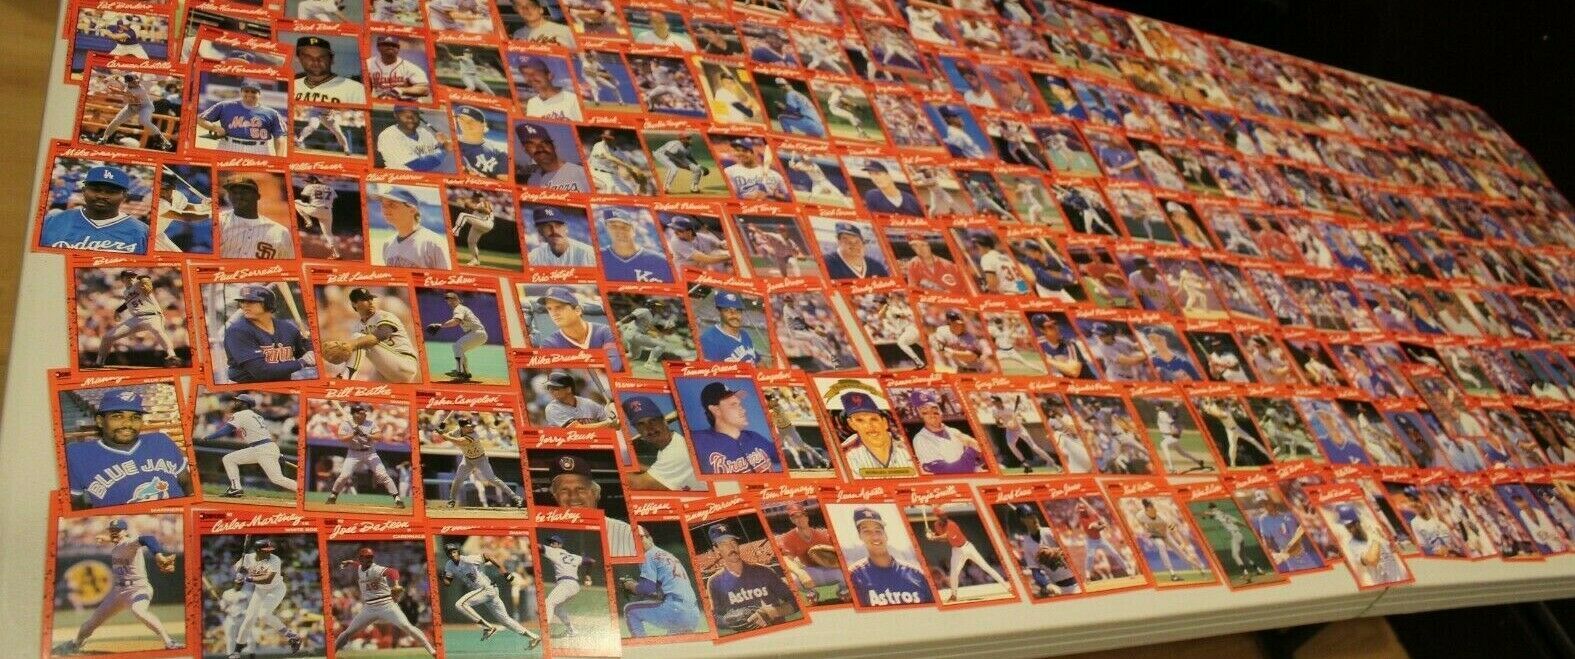 Primary image for 306 Baseball Cards 1990 Don Russ Assorted Set Sports Trading Collectibles 